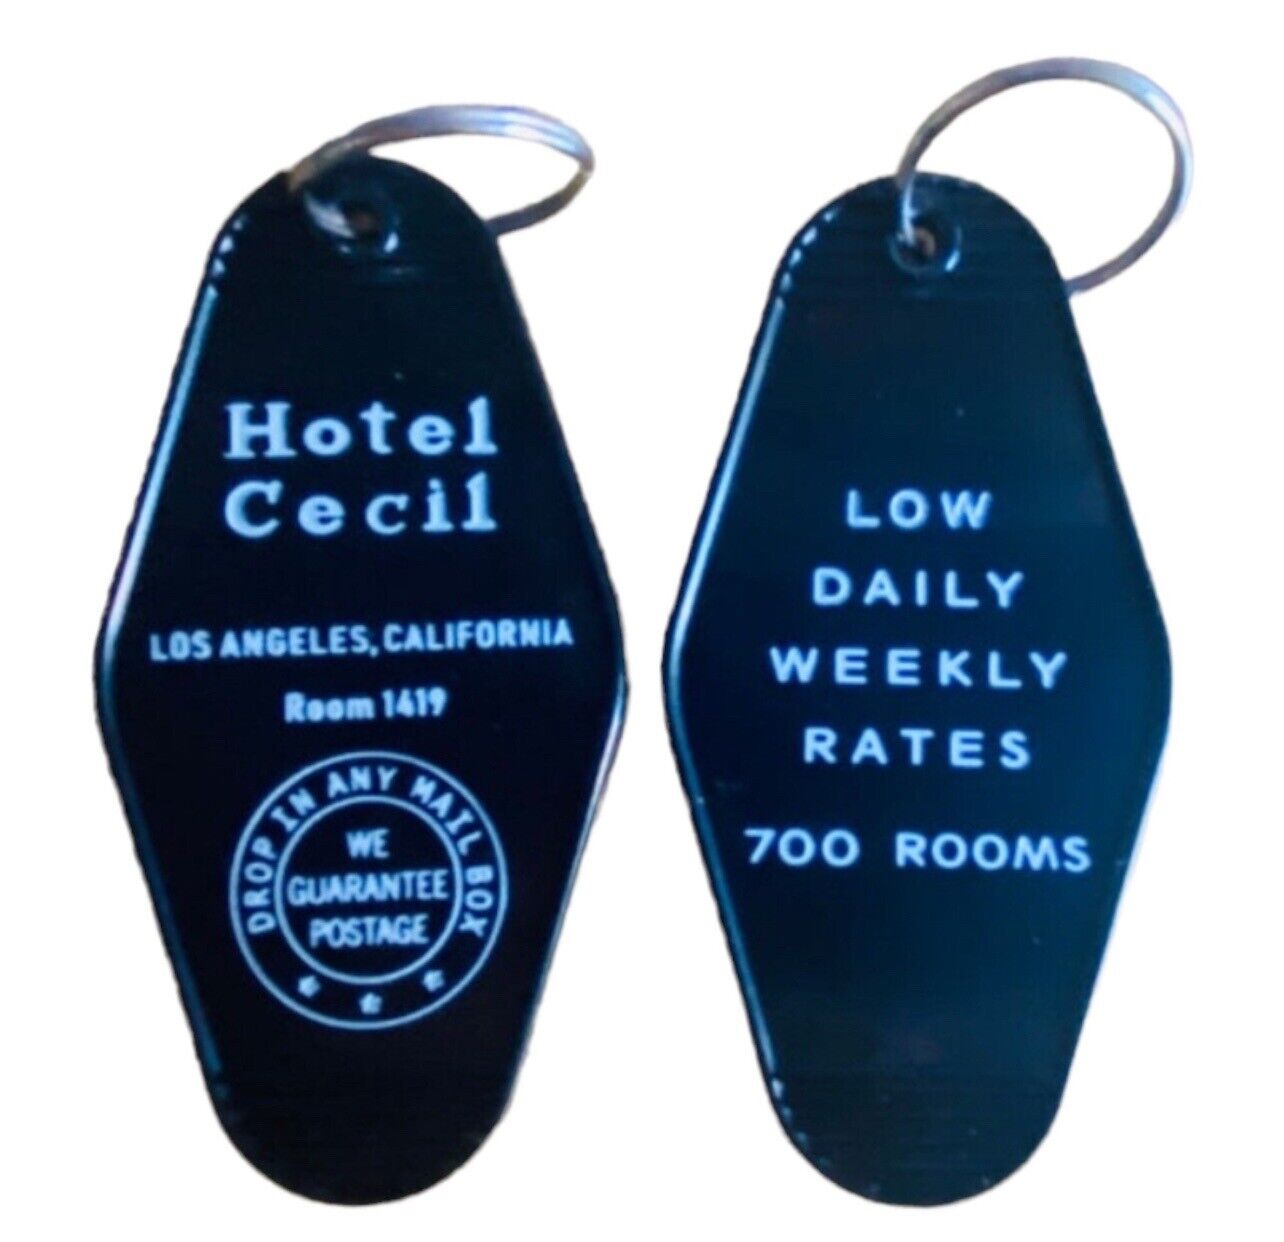 The HOTEL CECIL inspired keytag